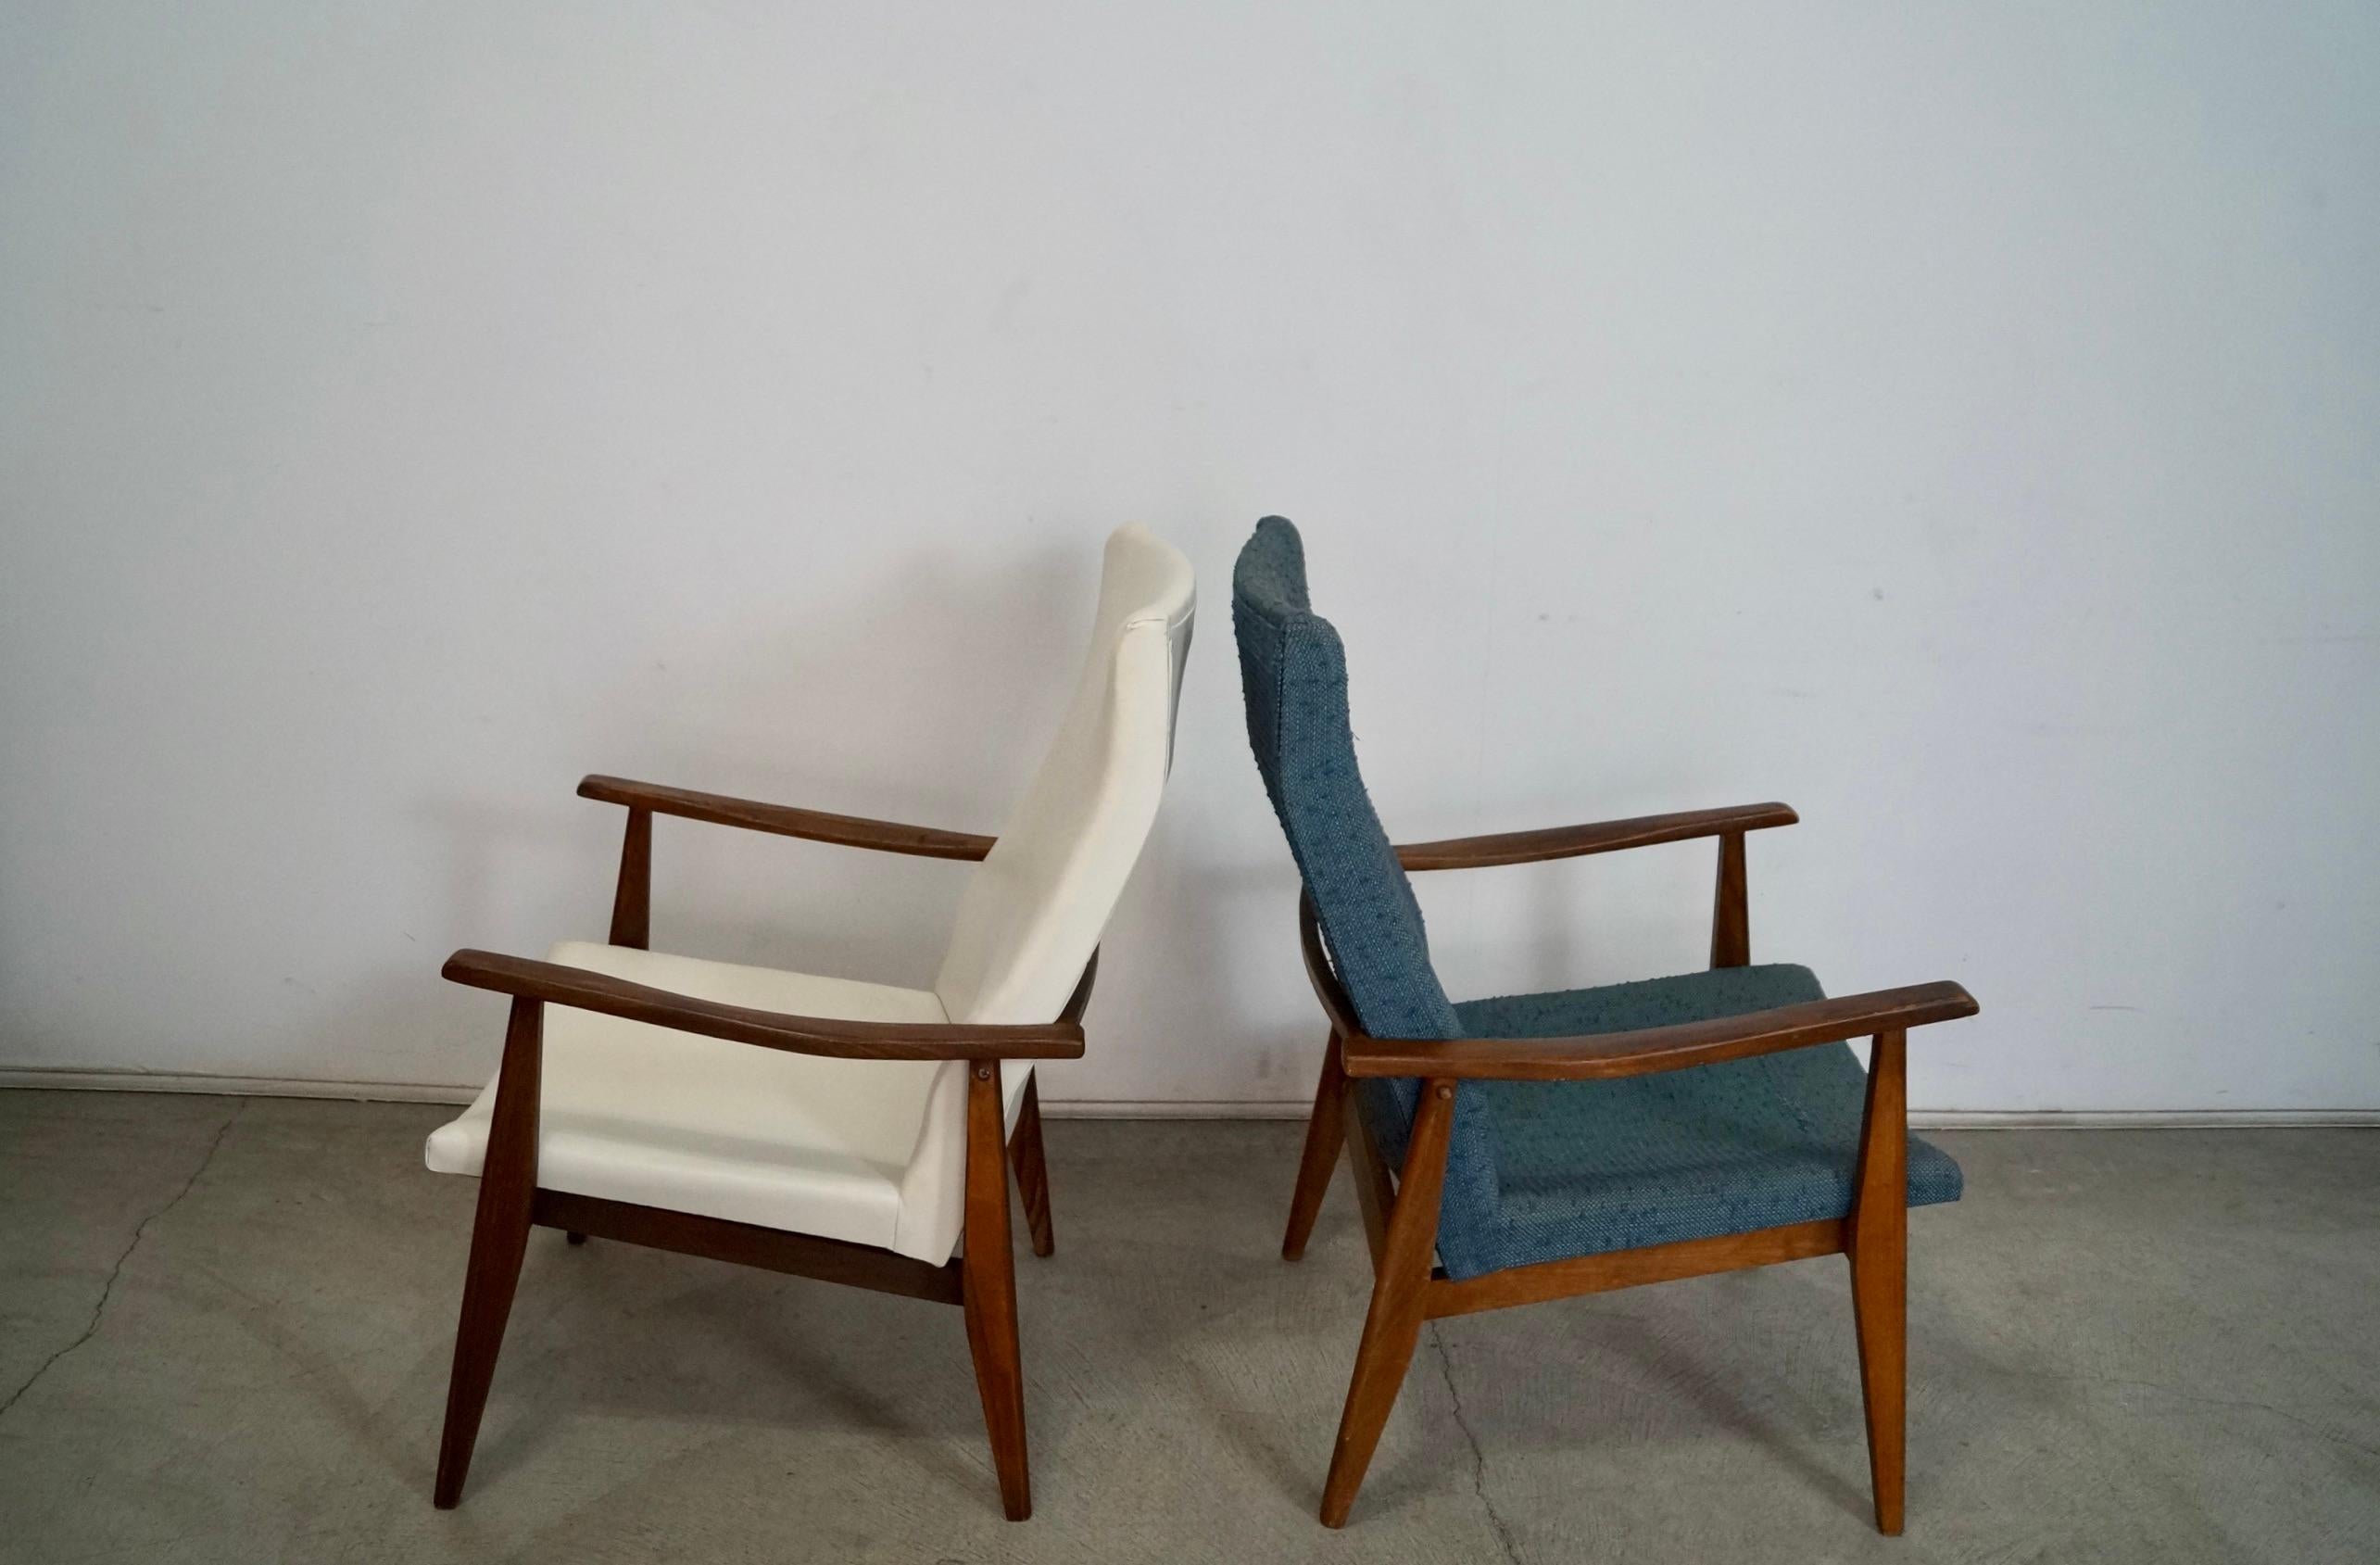 1960's Mid-Century Modern Lounge Armchairs - a Pair In Good Condition For Sale In Burbank, CA